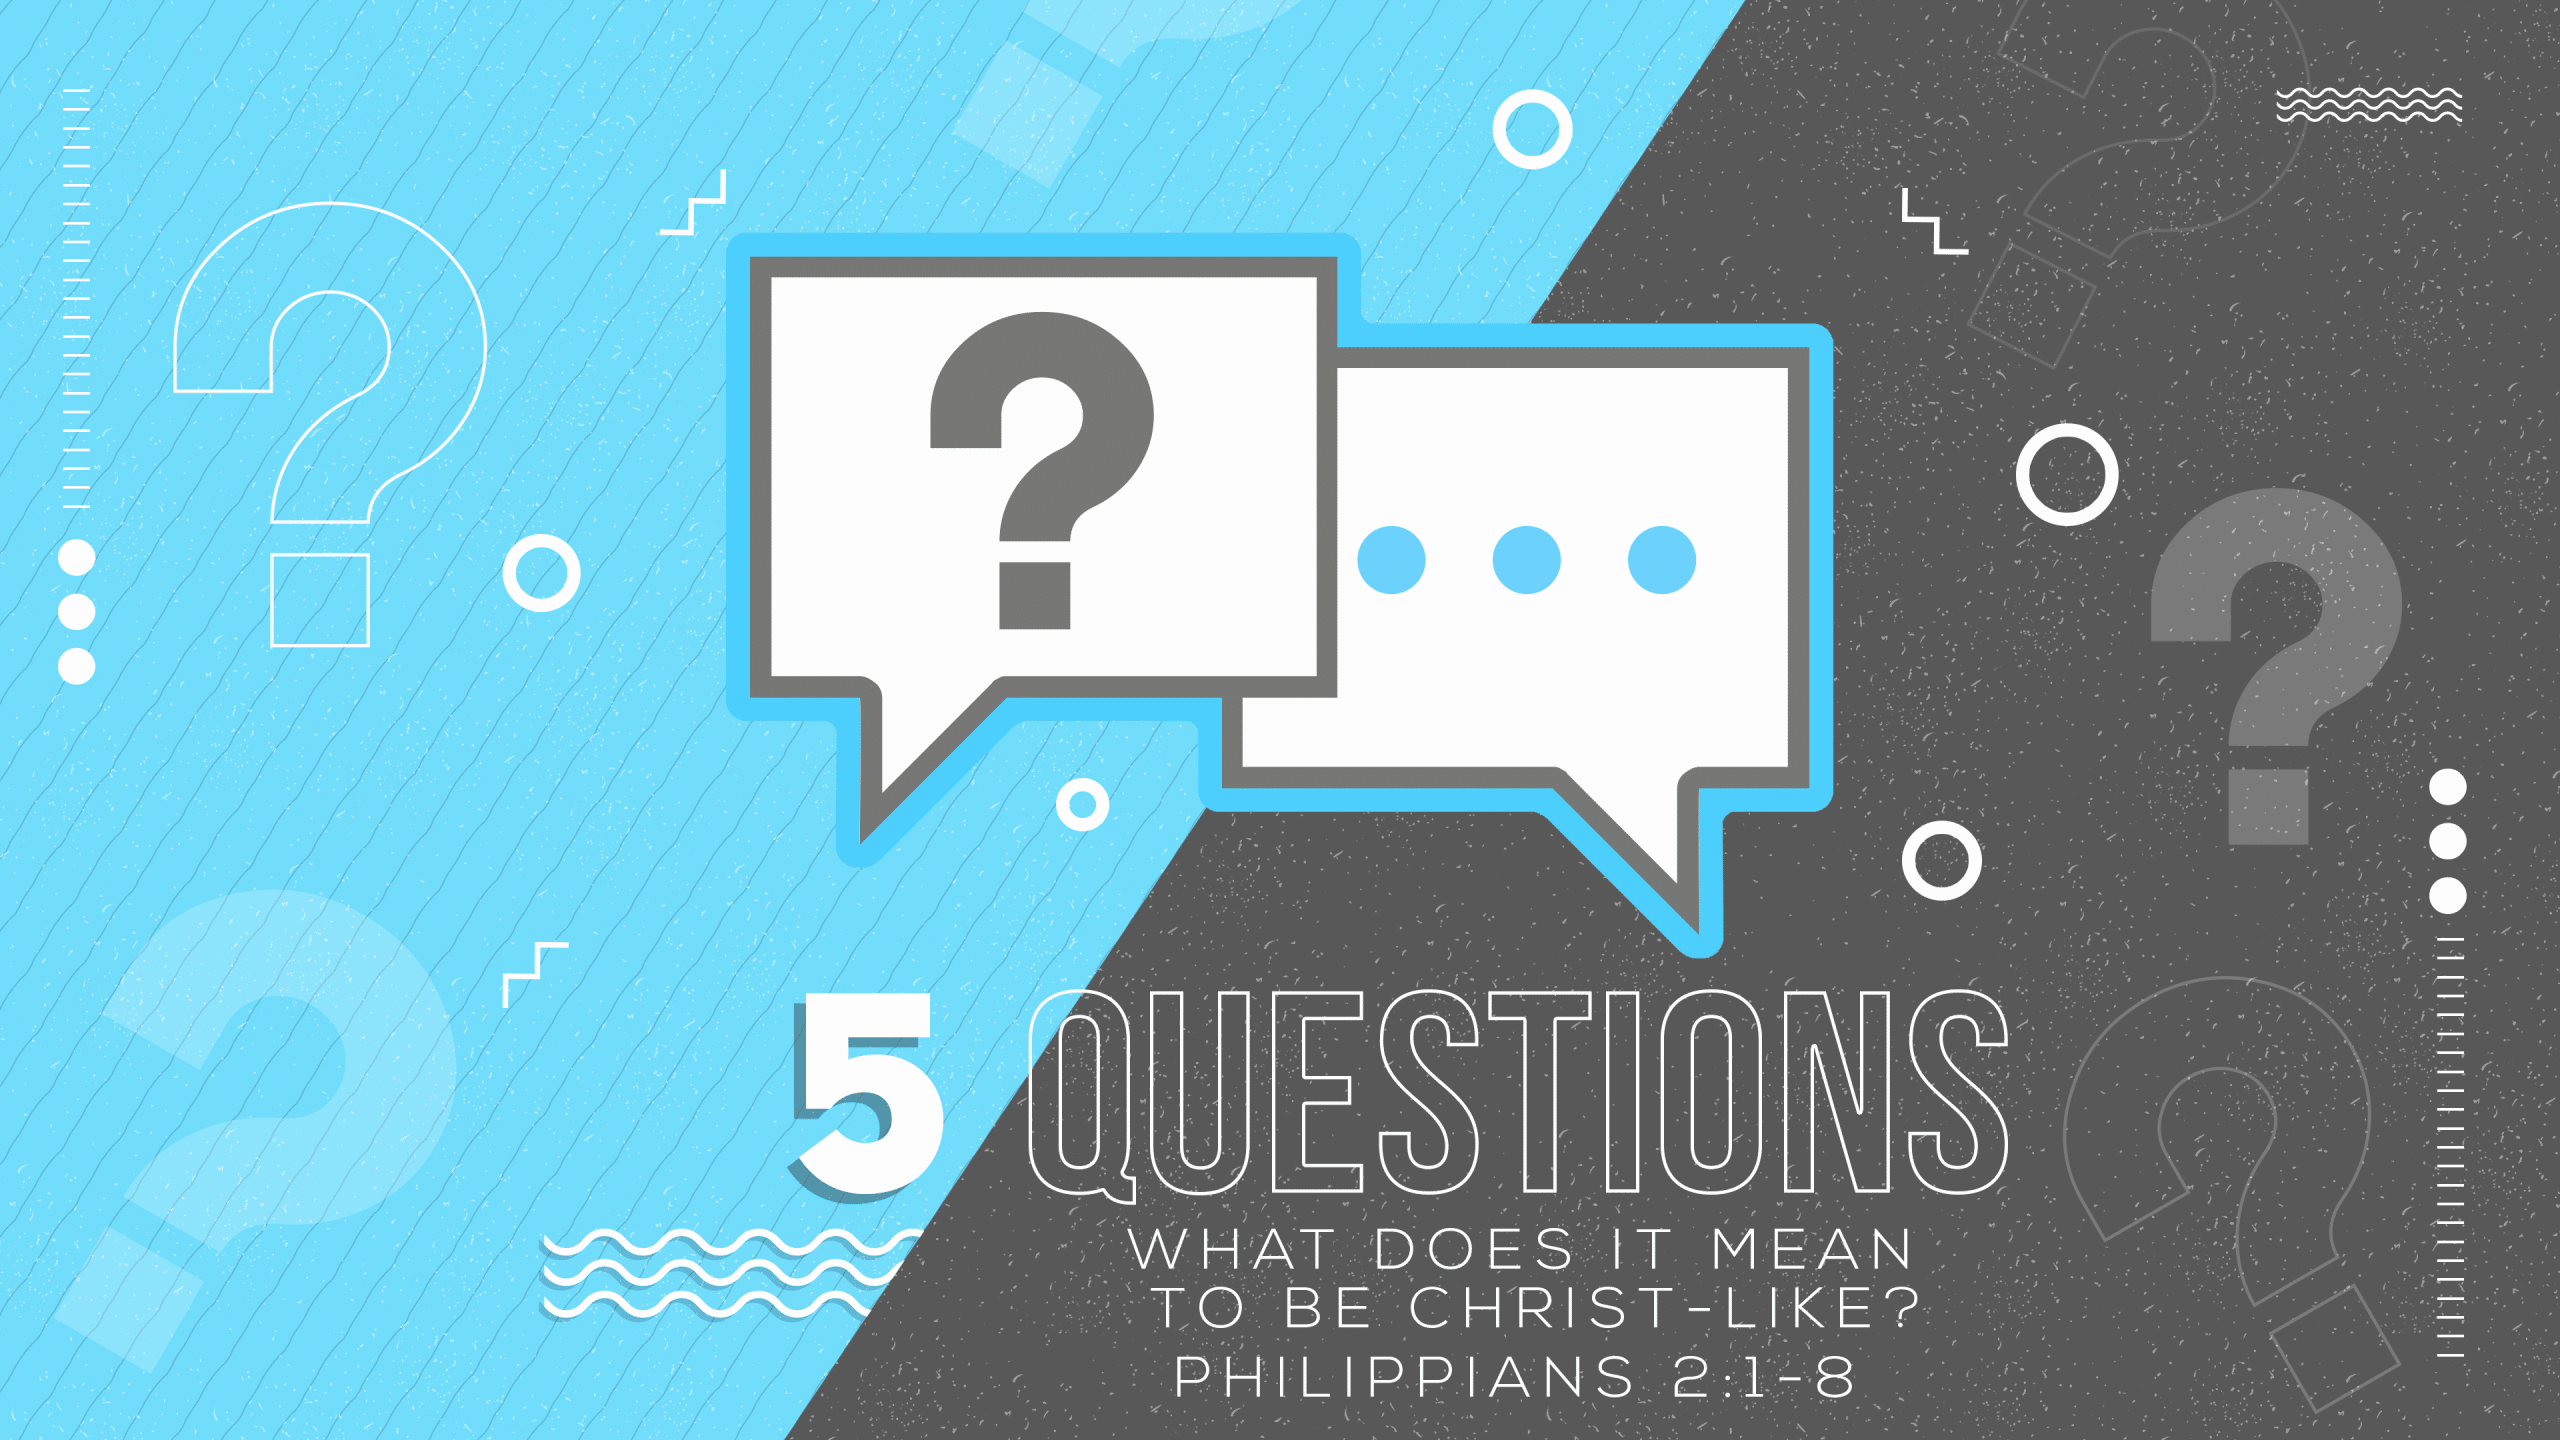 5 Questions: What Does It Mean To Be Christ-Like?